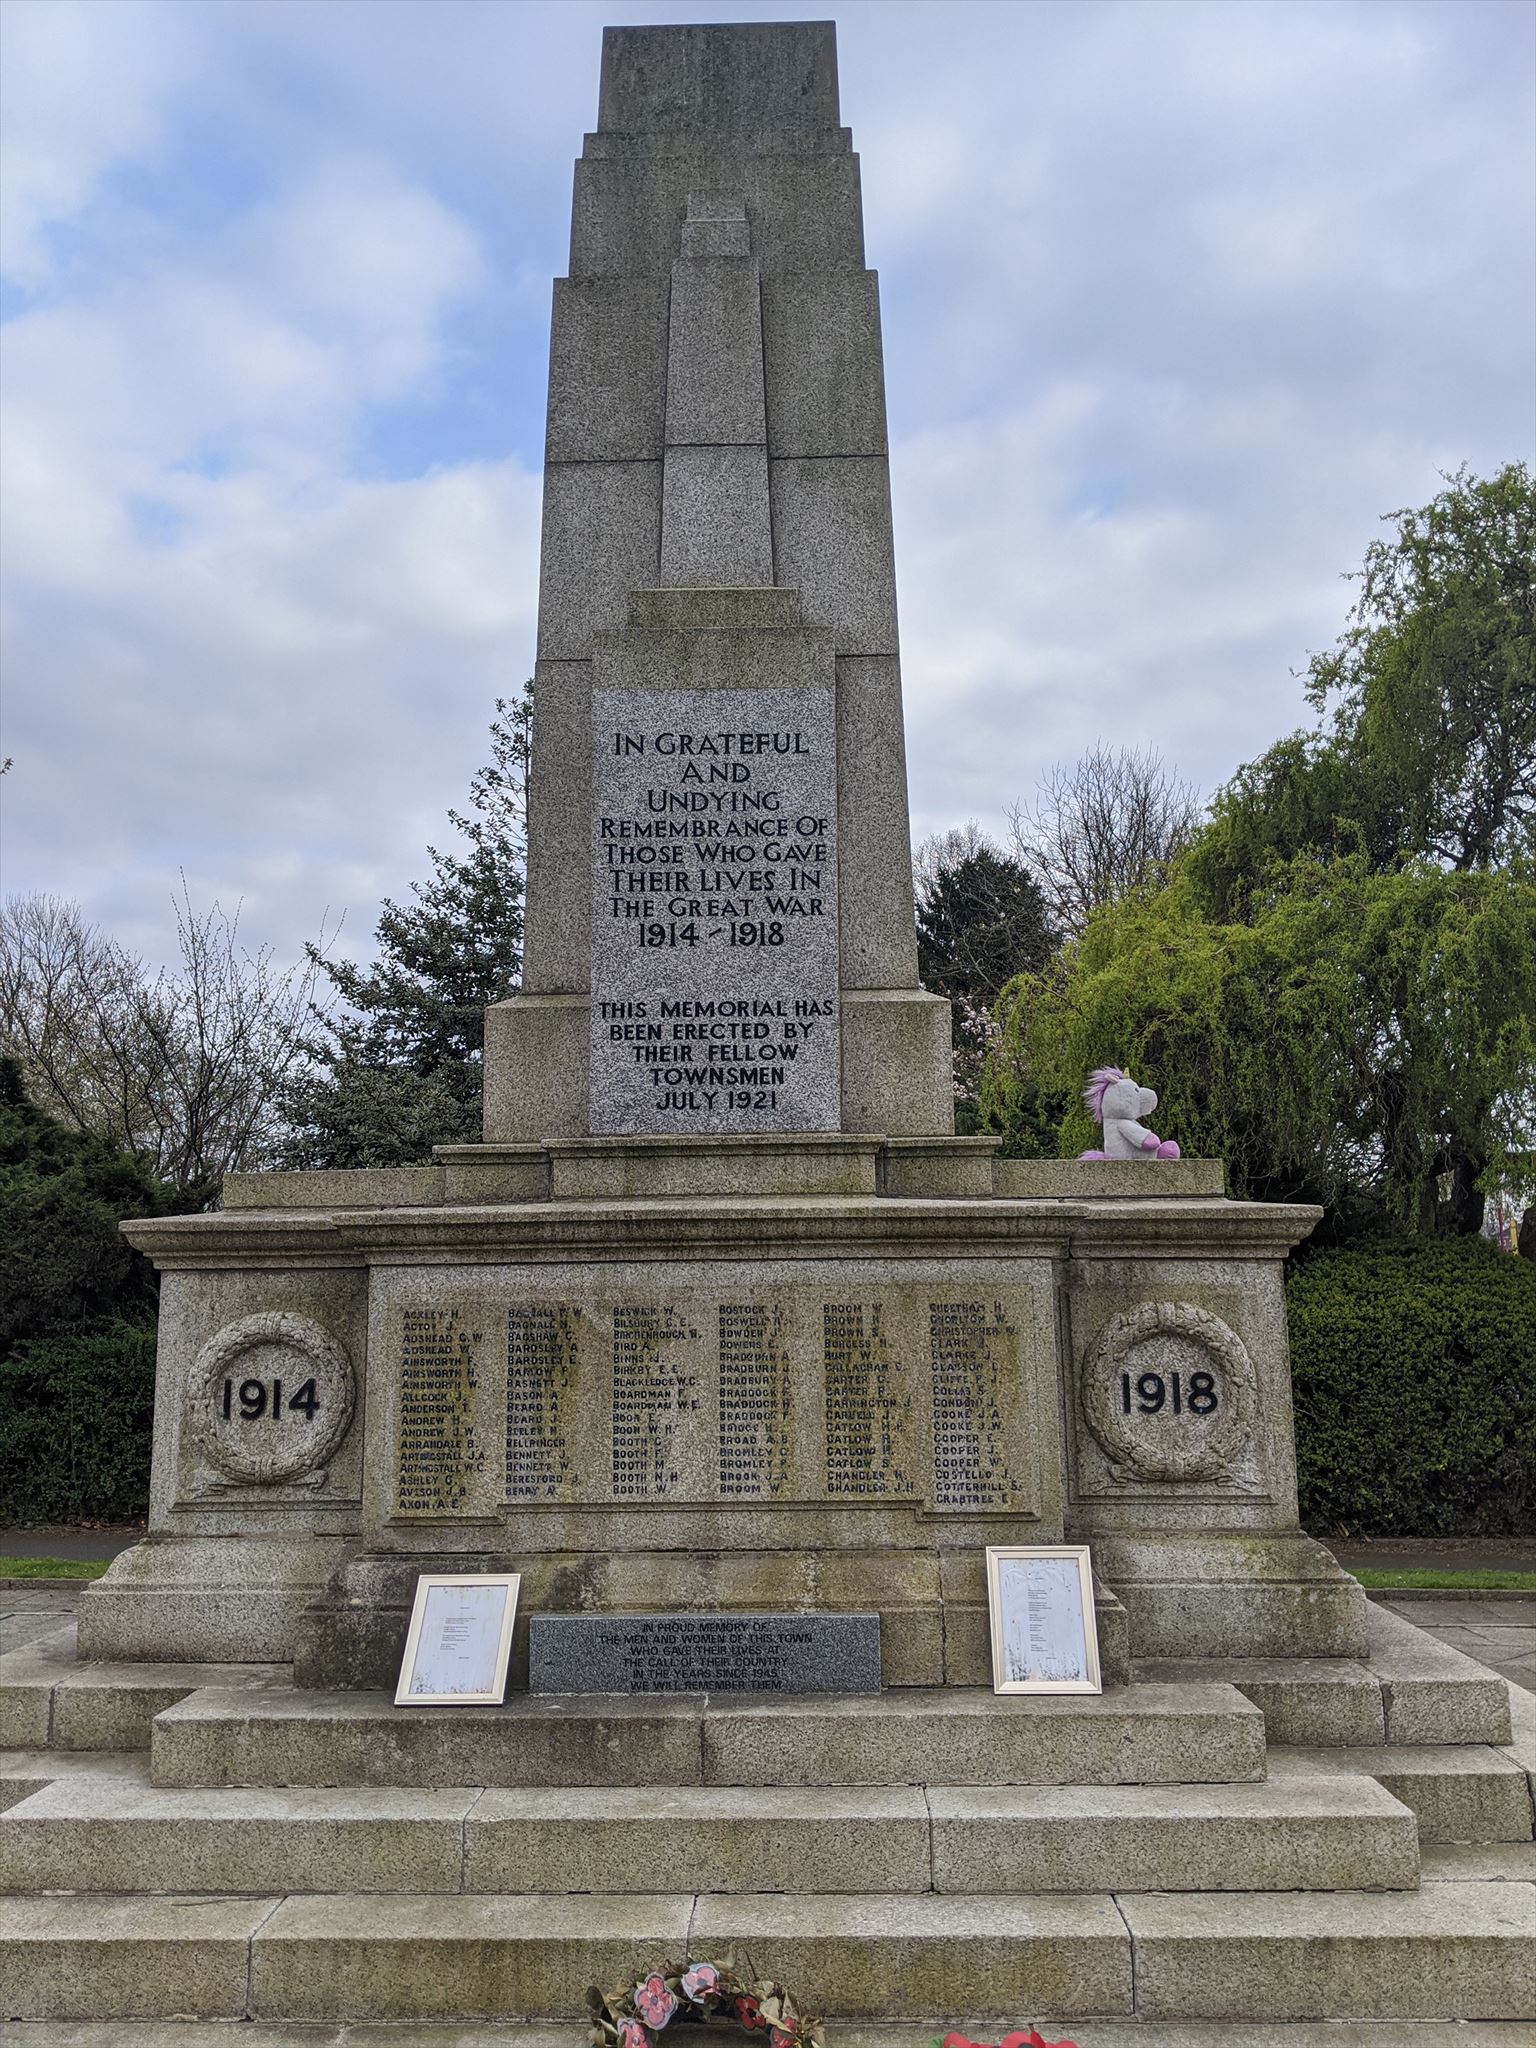 Photograph of Victoria Park War Memorial. Two inscriptions are clearly visible (see below). On the front face of the monument, a list of over 100 names split into 6 columns. On the left and right of the memorial are two dates, 1914 and 1918. Sitting on the memorial is a small stuffed toy left in tribute. Flower wreaths are visible at the base of the steps of the monument.